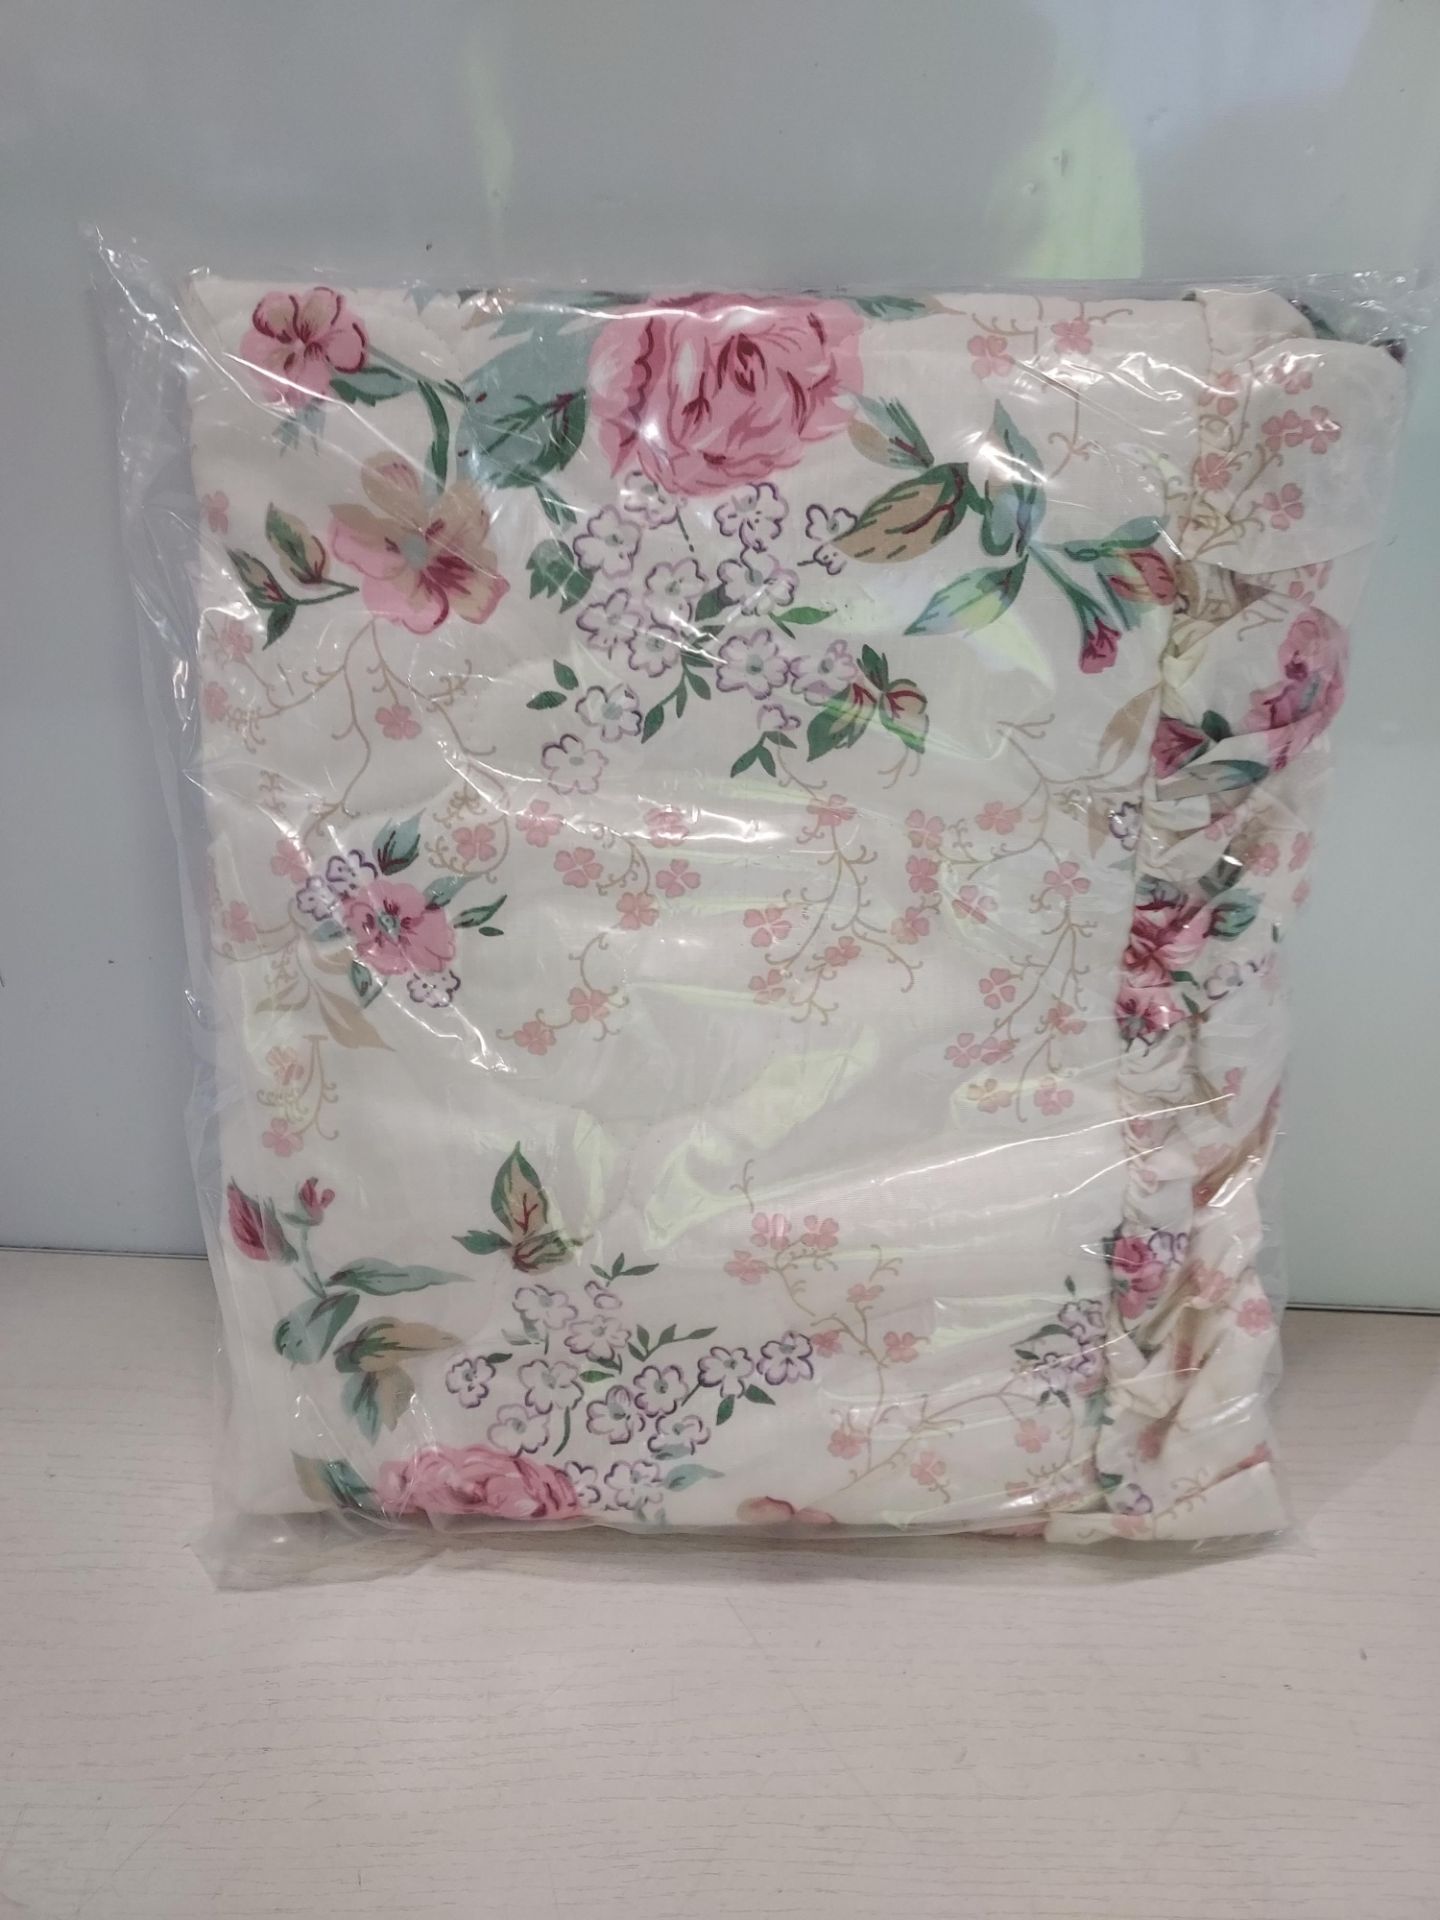 40 X BRAND NEW DIANA COMPE SINGLE PILLOW CASES - ON ROSE GARDEN DESIGN - ( 20 SETS OF 2 ) ( 74 CM